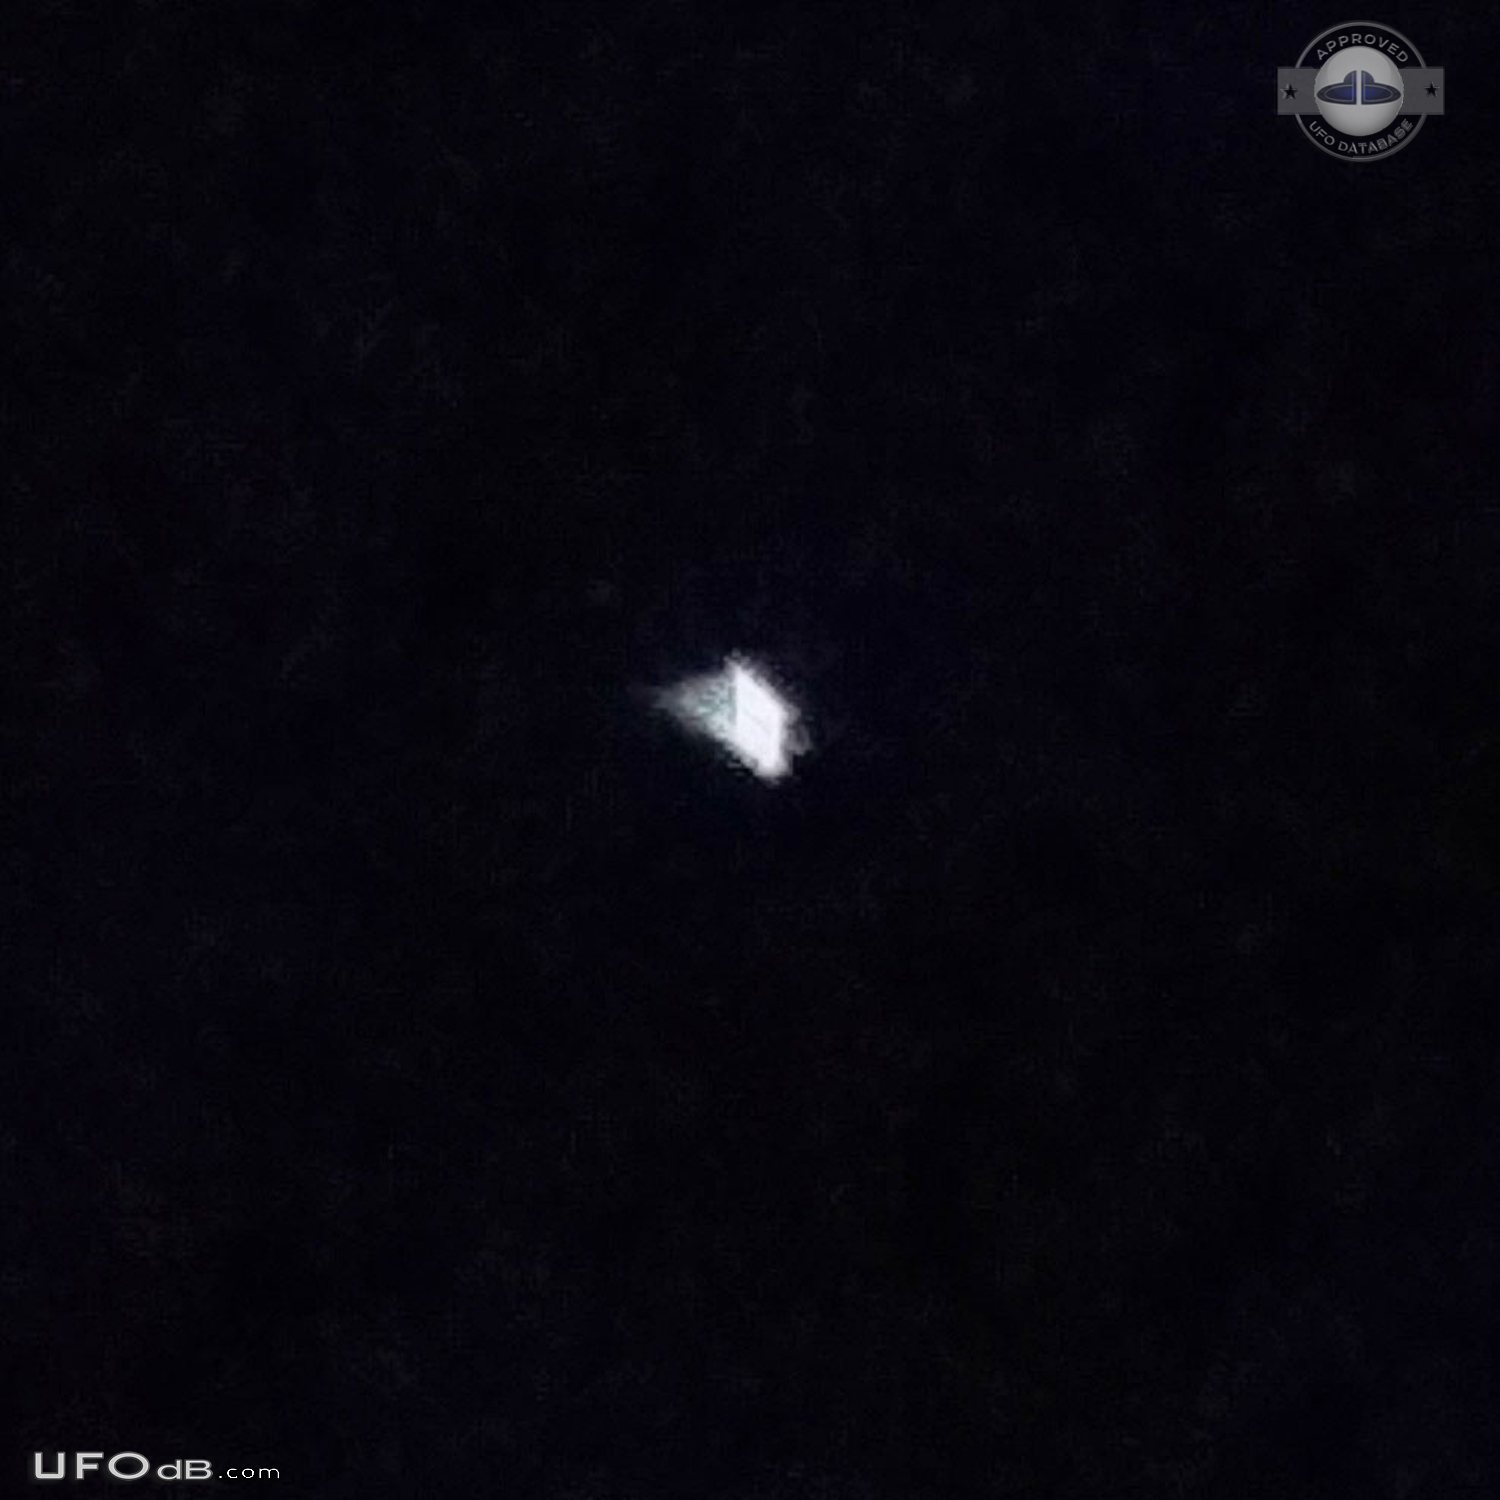 Seen from distance unmoving much larger other stars - Gatineau Quebec  UFO Picture #767-1